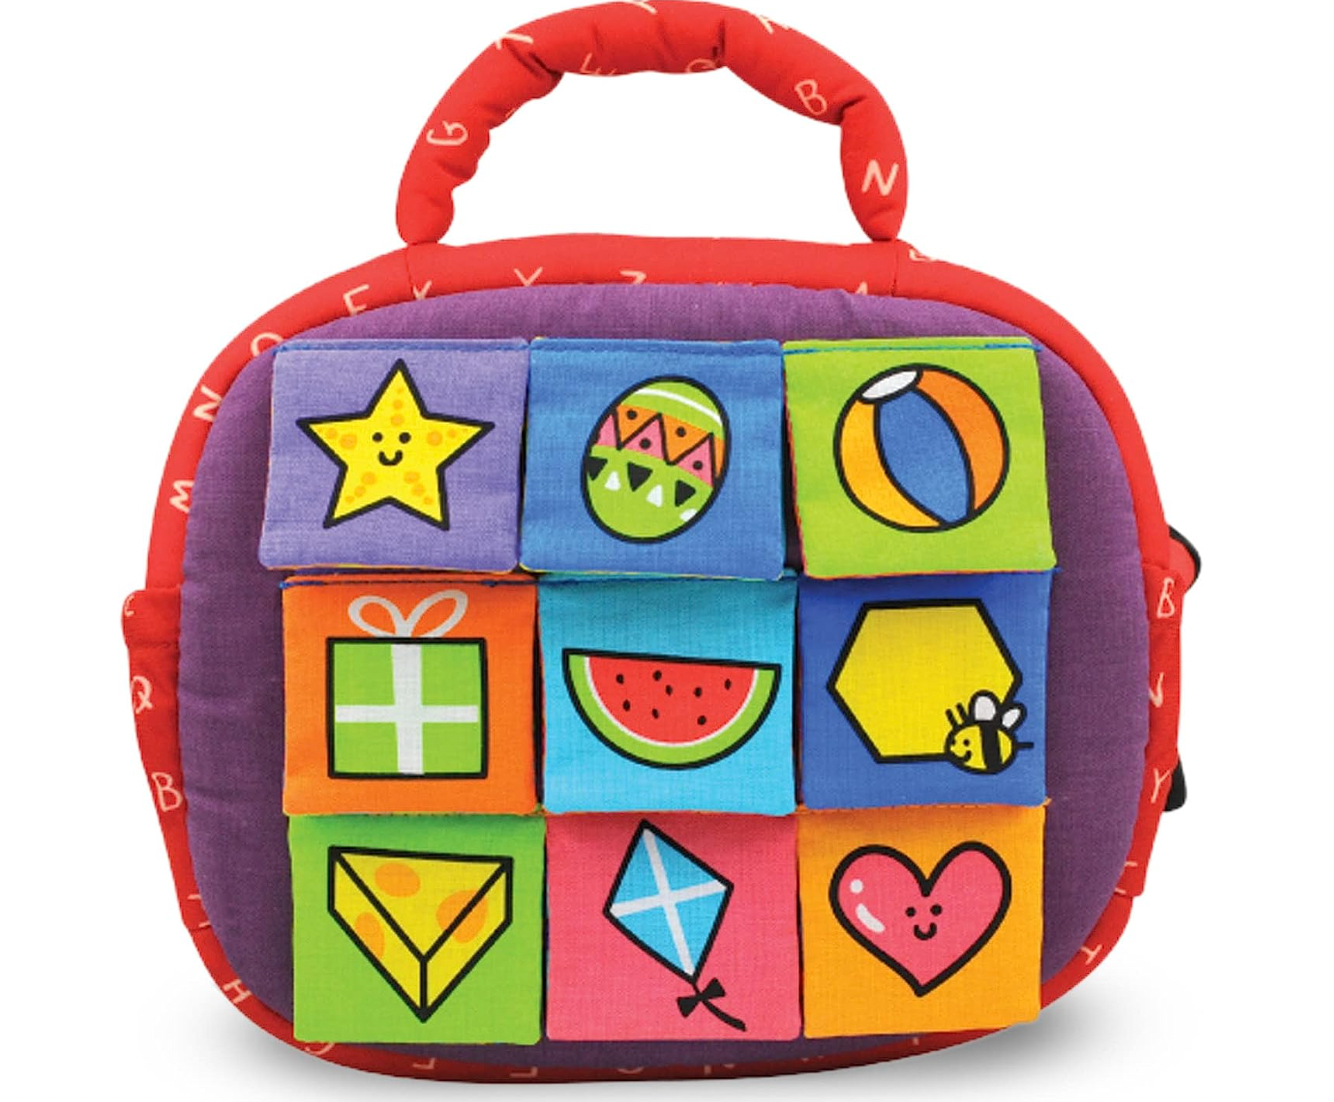 Melissa & Doug K's Kids Take-Along Shape Sorter Baby Toy With 2-Sided Activity Bag and 9 Textured Shape Blocks